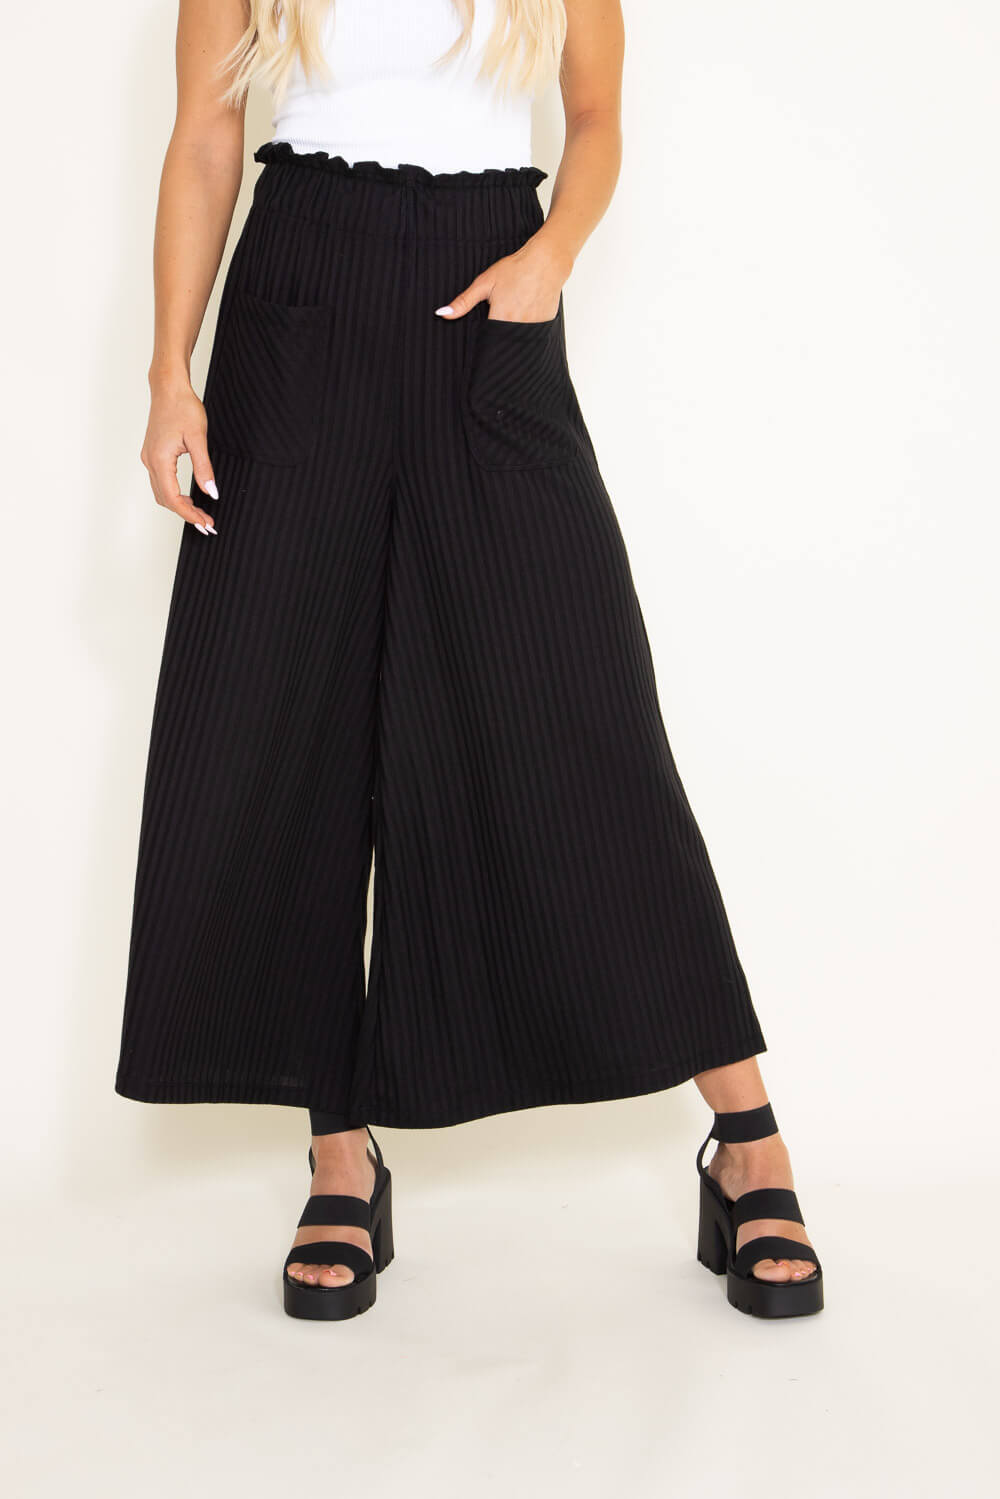 Flowy belted pant